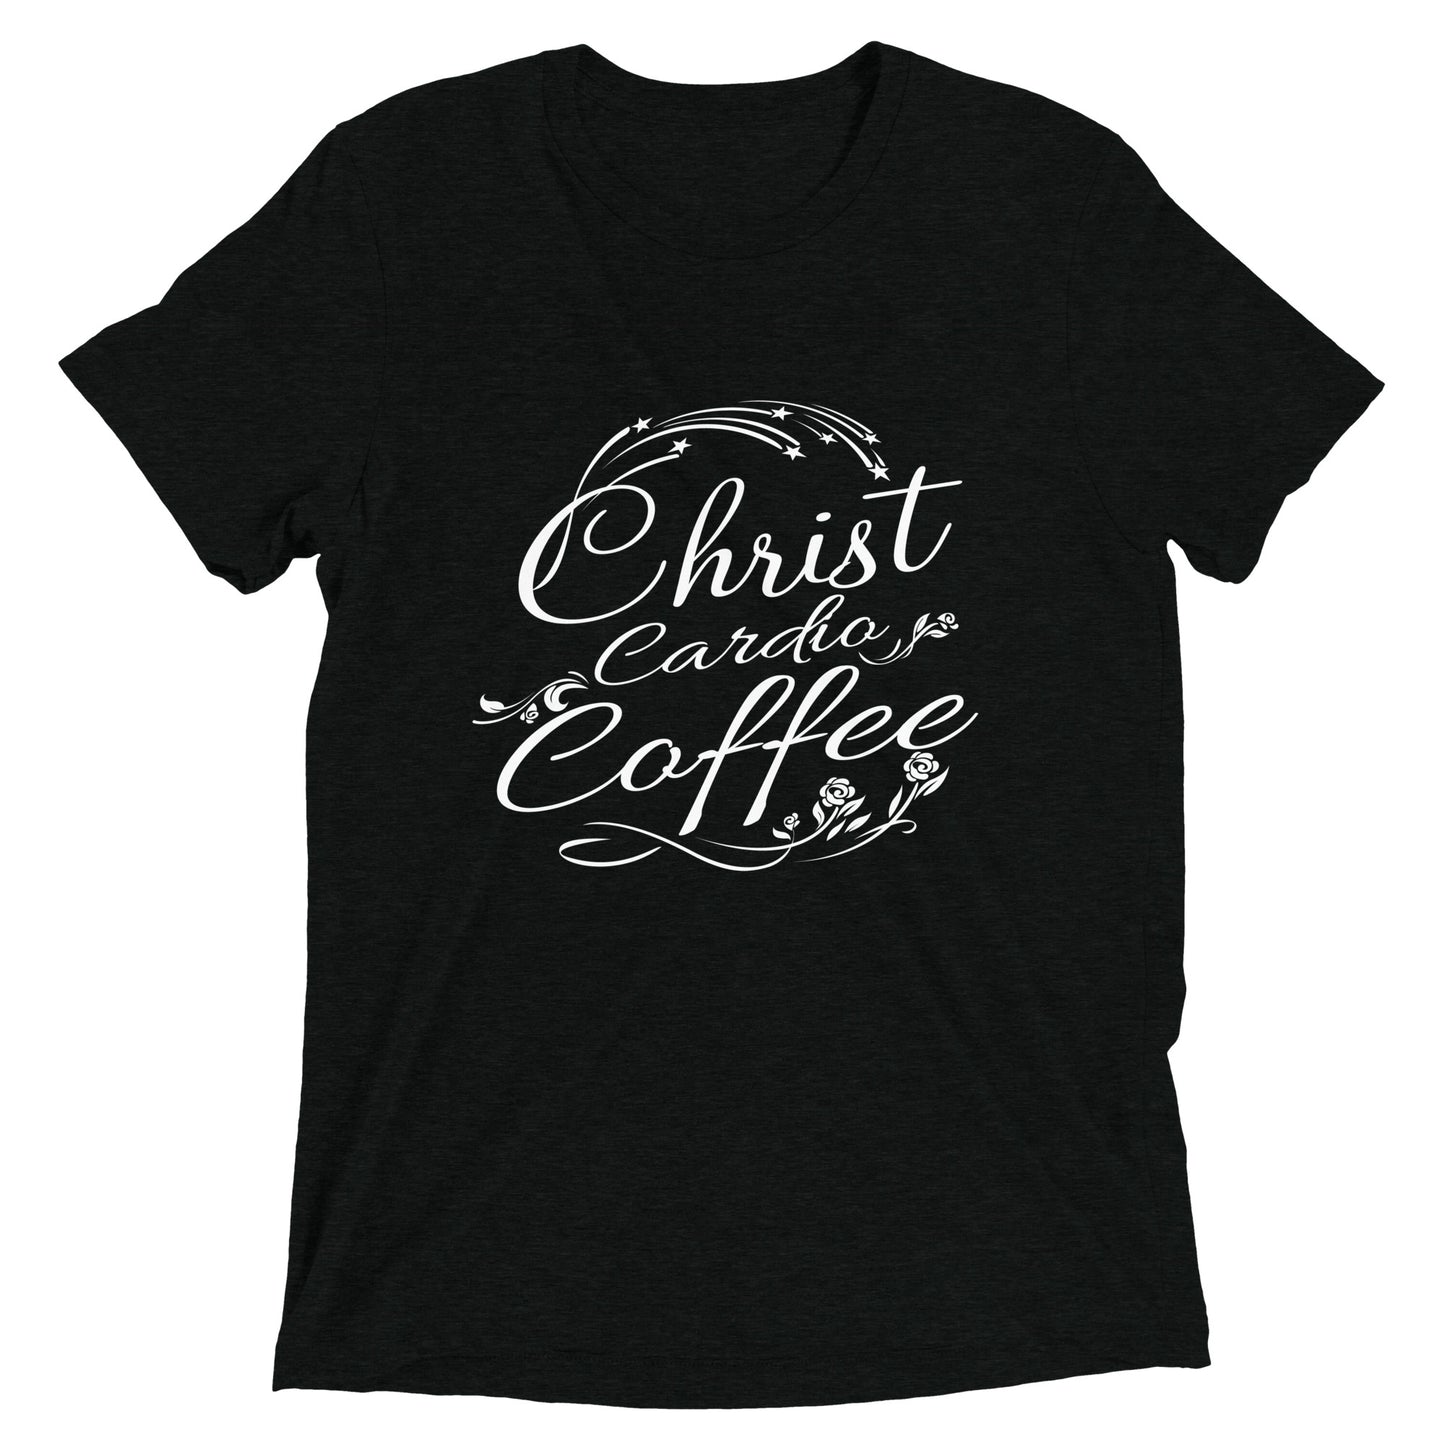 Christ Coffee Cardio - Short sleeve t-shirt - View All Colors